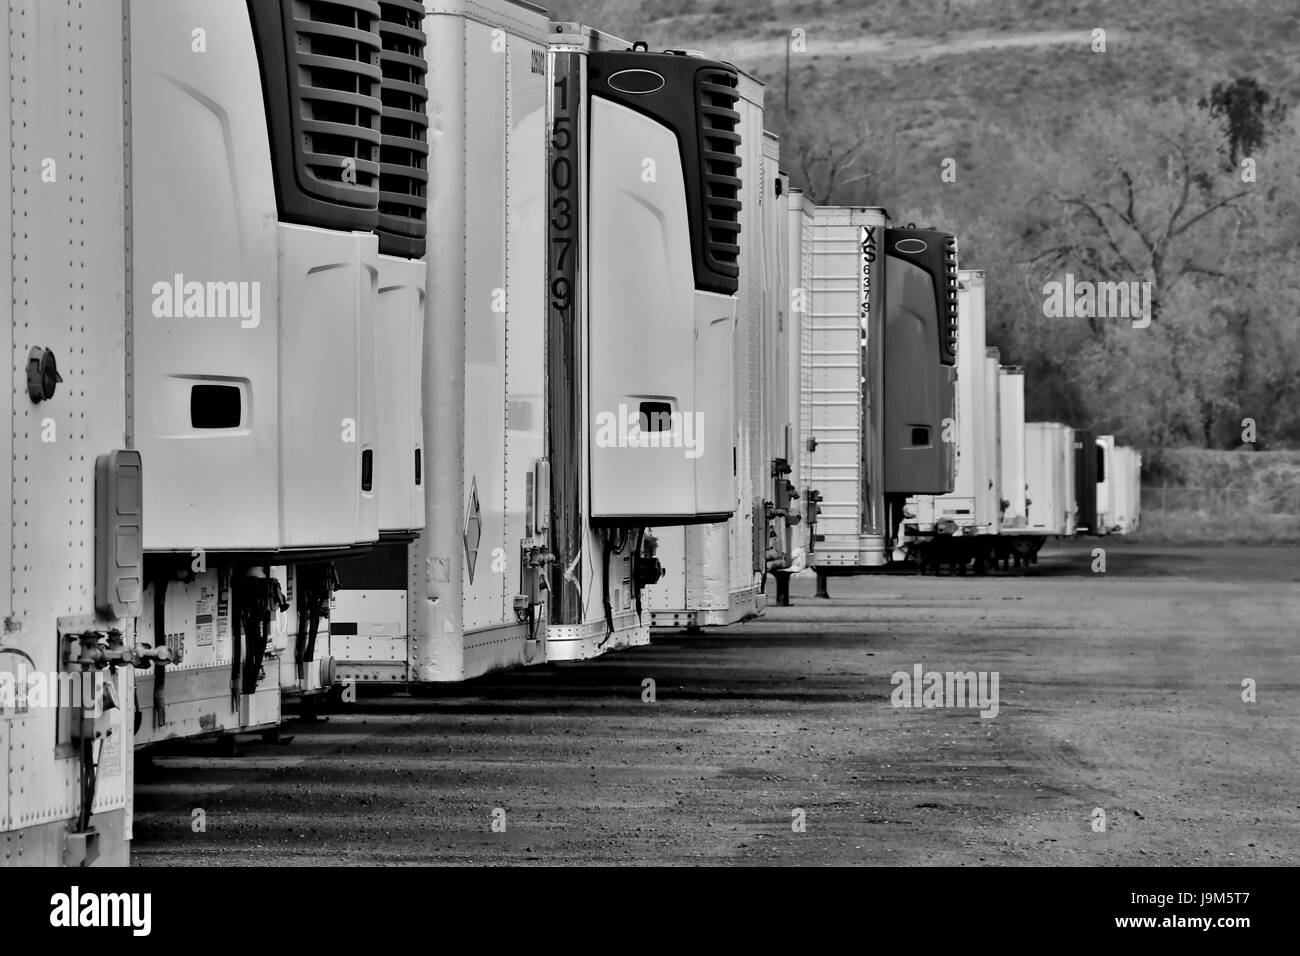 Rows of Semi-Trailers await their assignment in an old dirt drop-lot near Denver, Colorado. All markings and Trademarks Removed. Stock Photo